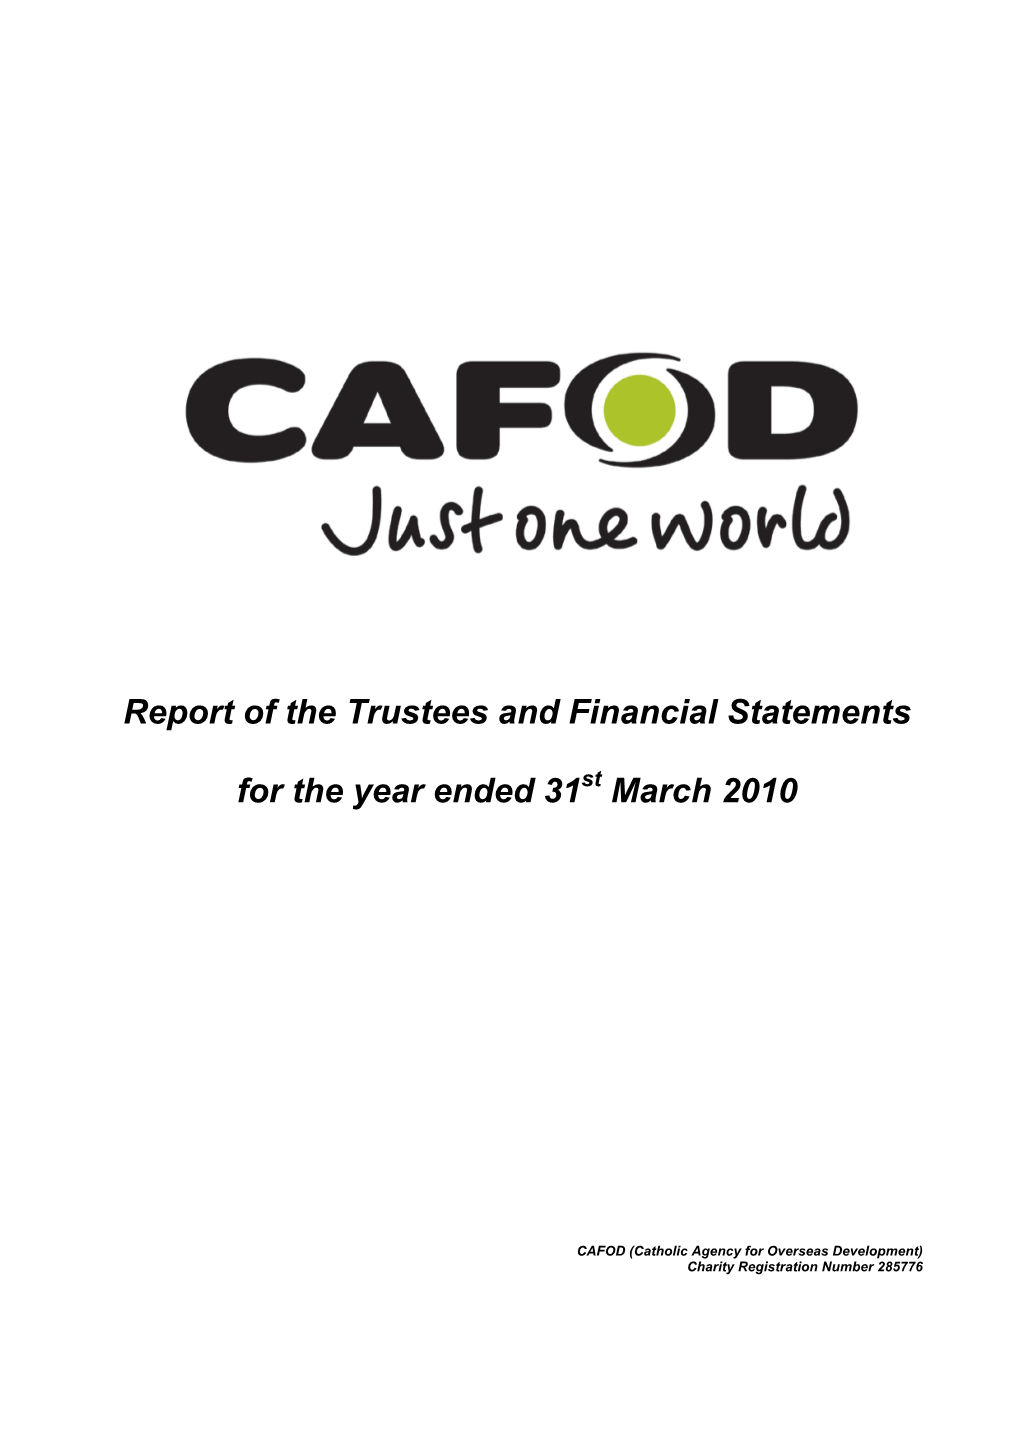 CAFOD Reports of the Trustees and Financial Statements 2009